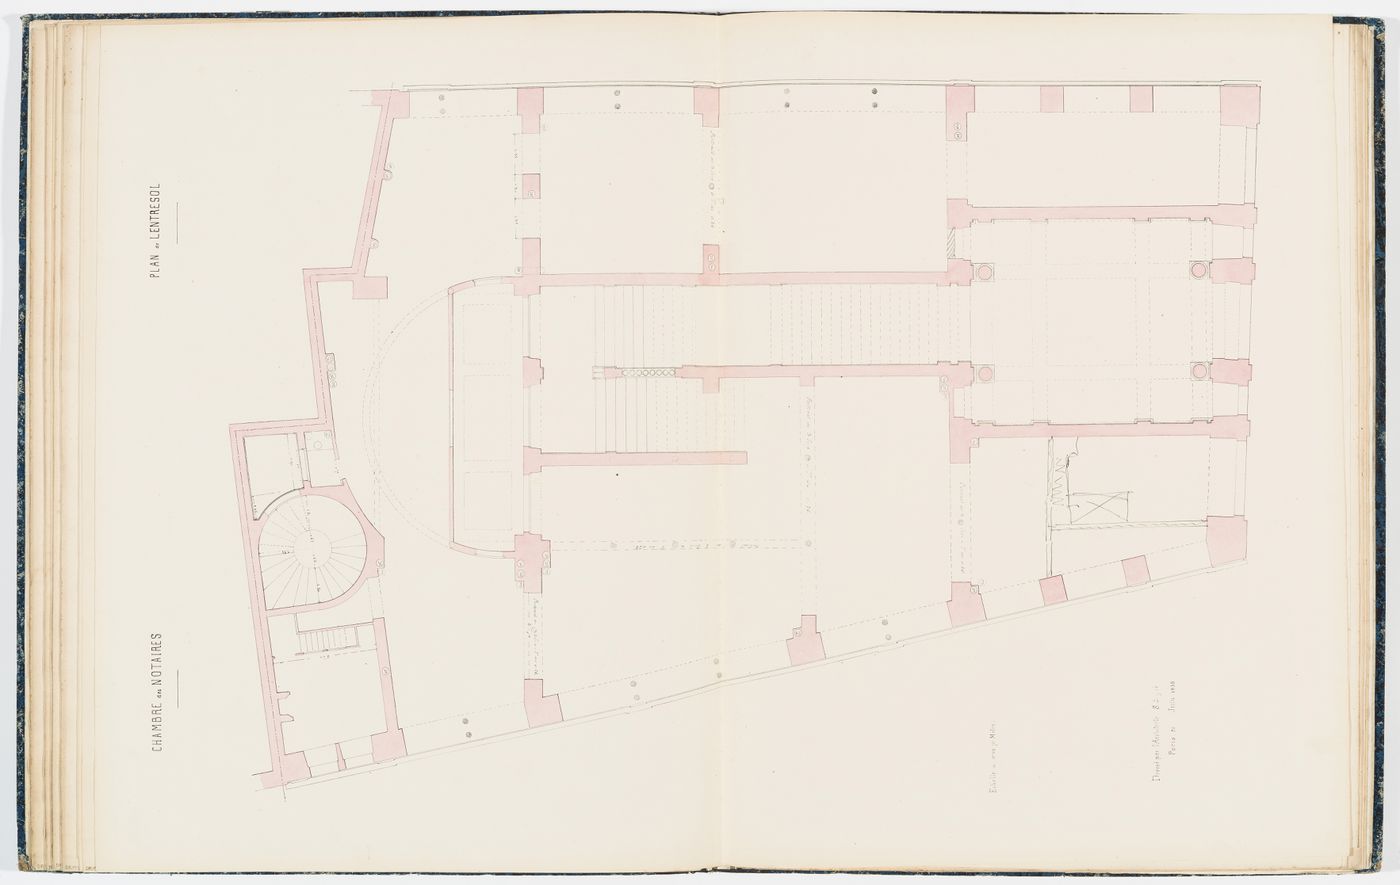 Working drawing for the Chambre des Notaires: Plan for the "entresol"